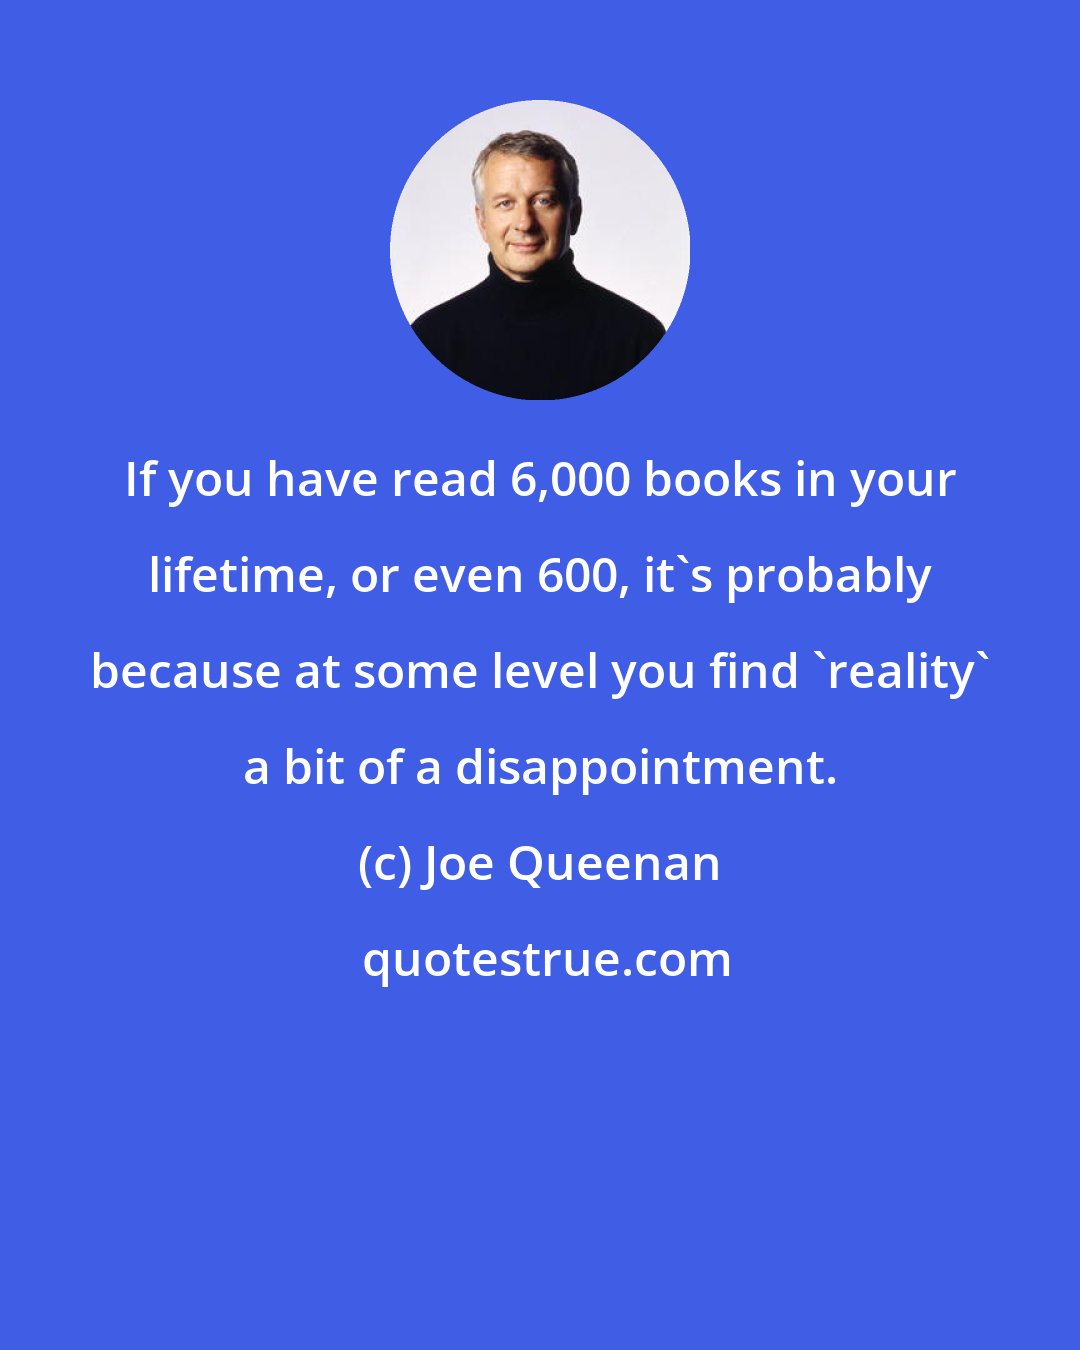 Joe Queenan: If you have read 6,000 books in your lifetime, or even 600, it's probably because at some level you find 'reality' a bit of a disappointment.